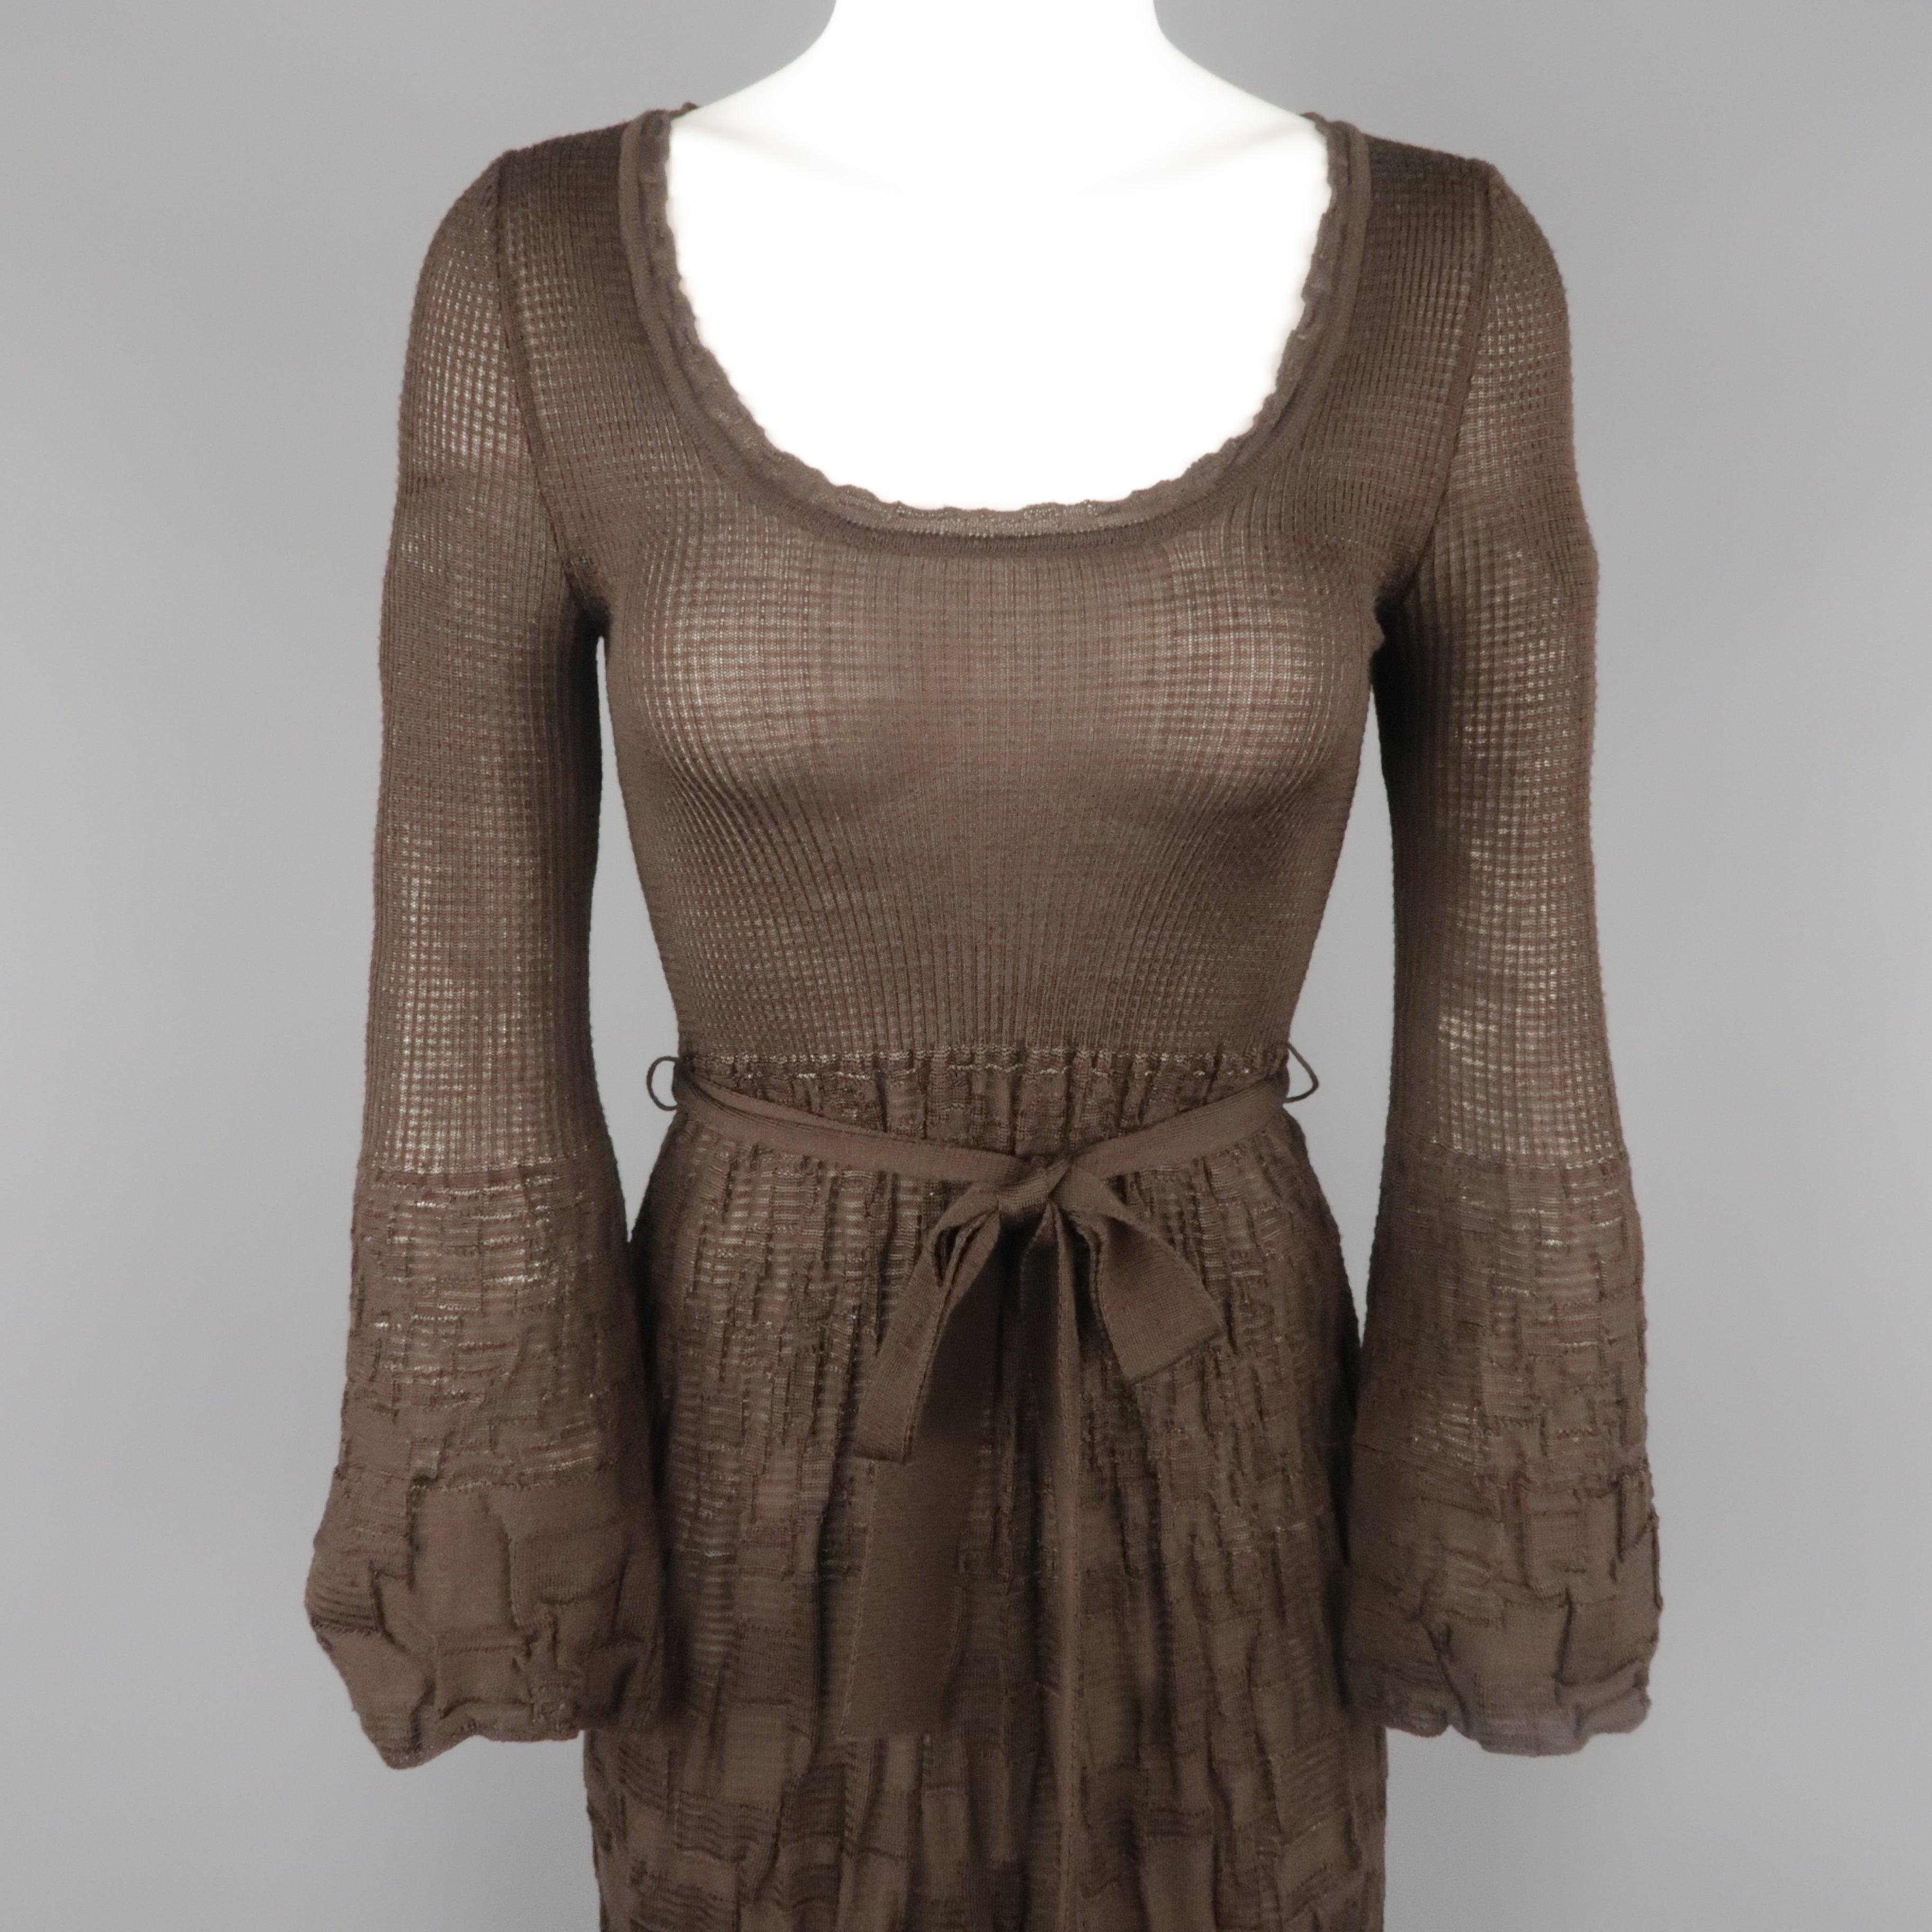 M by MISSONI dress comes in brown wool viscose blend textured stretch knit with a scoop neck, long bell sleeves, and ft flair A line skirt silhouette with tie belt. Made in Italy.Excellent Pre-Owned Condition. 

Marked:   IT 38 

Measurements: 
 